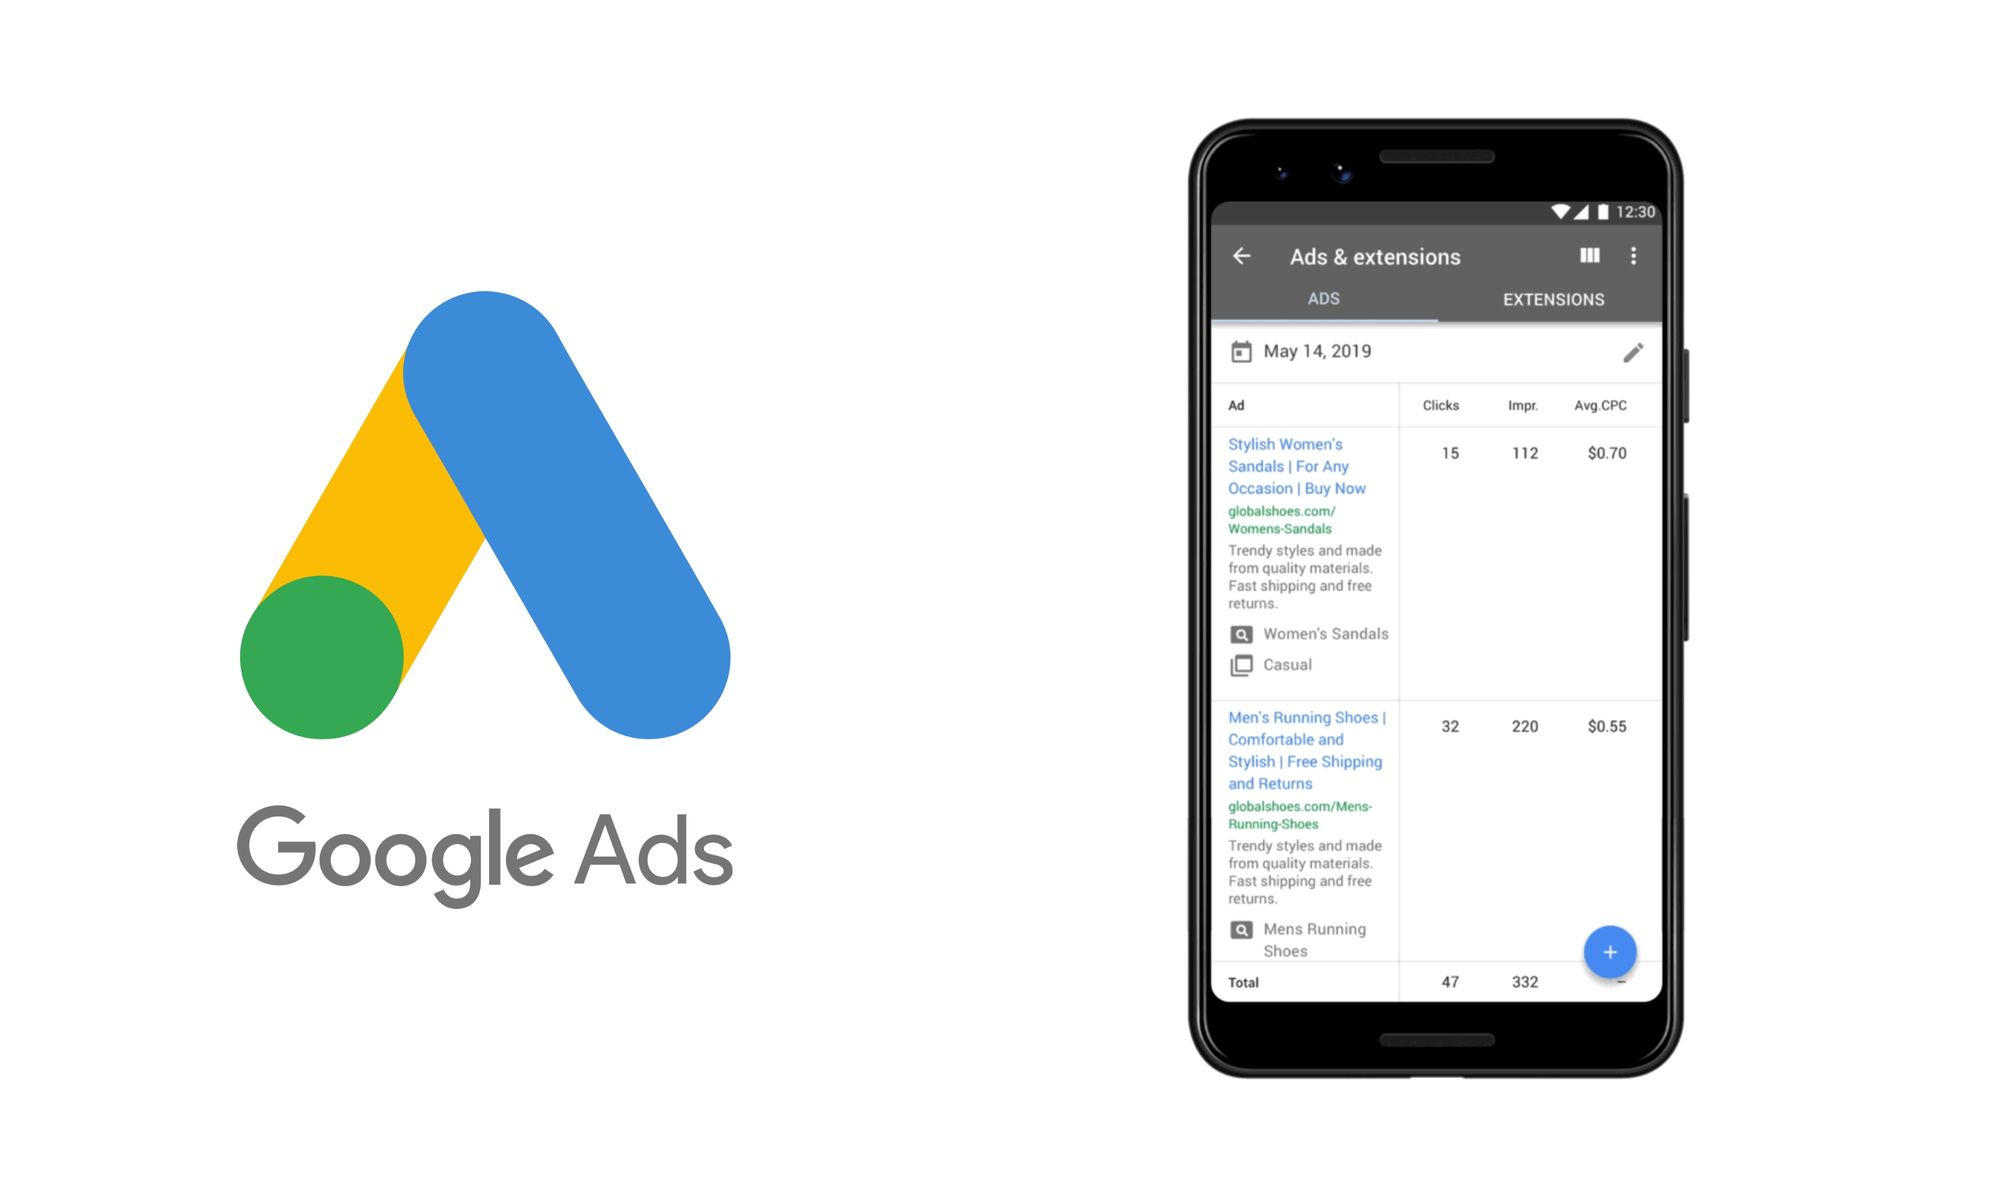 Negative keywords and responsive search ads added to Google Ads mobile app